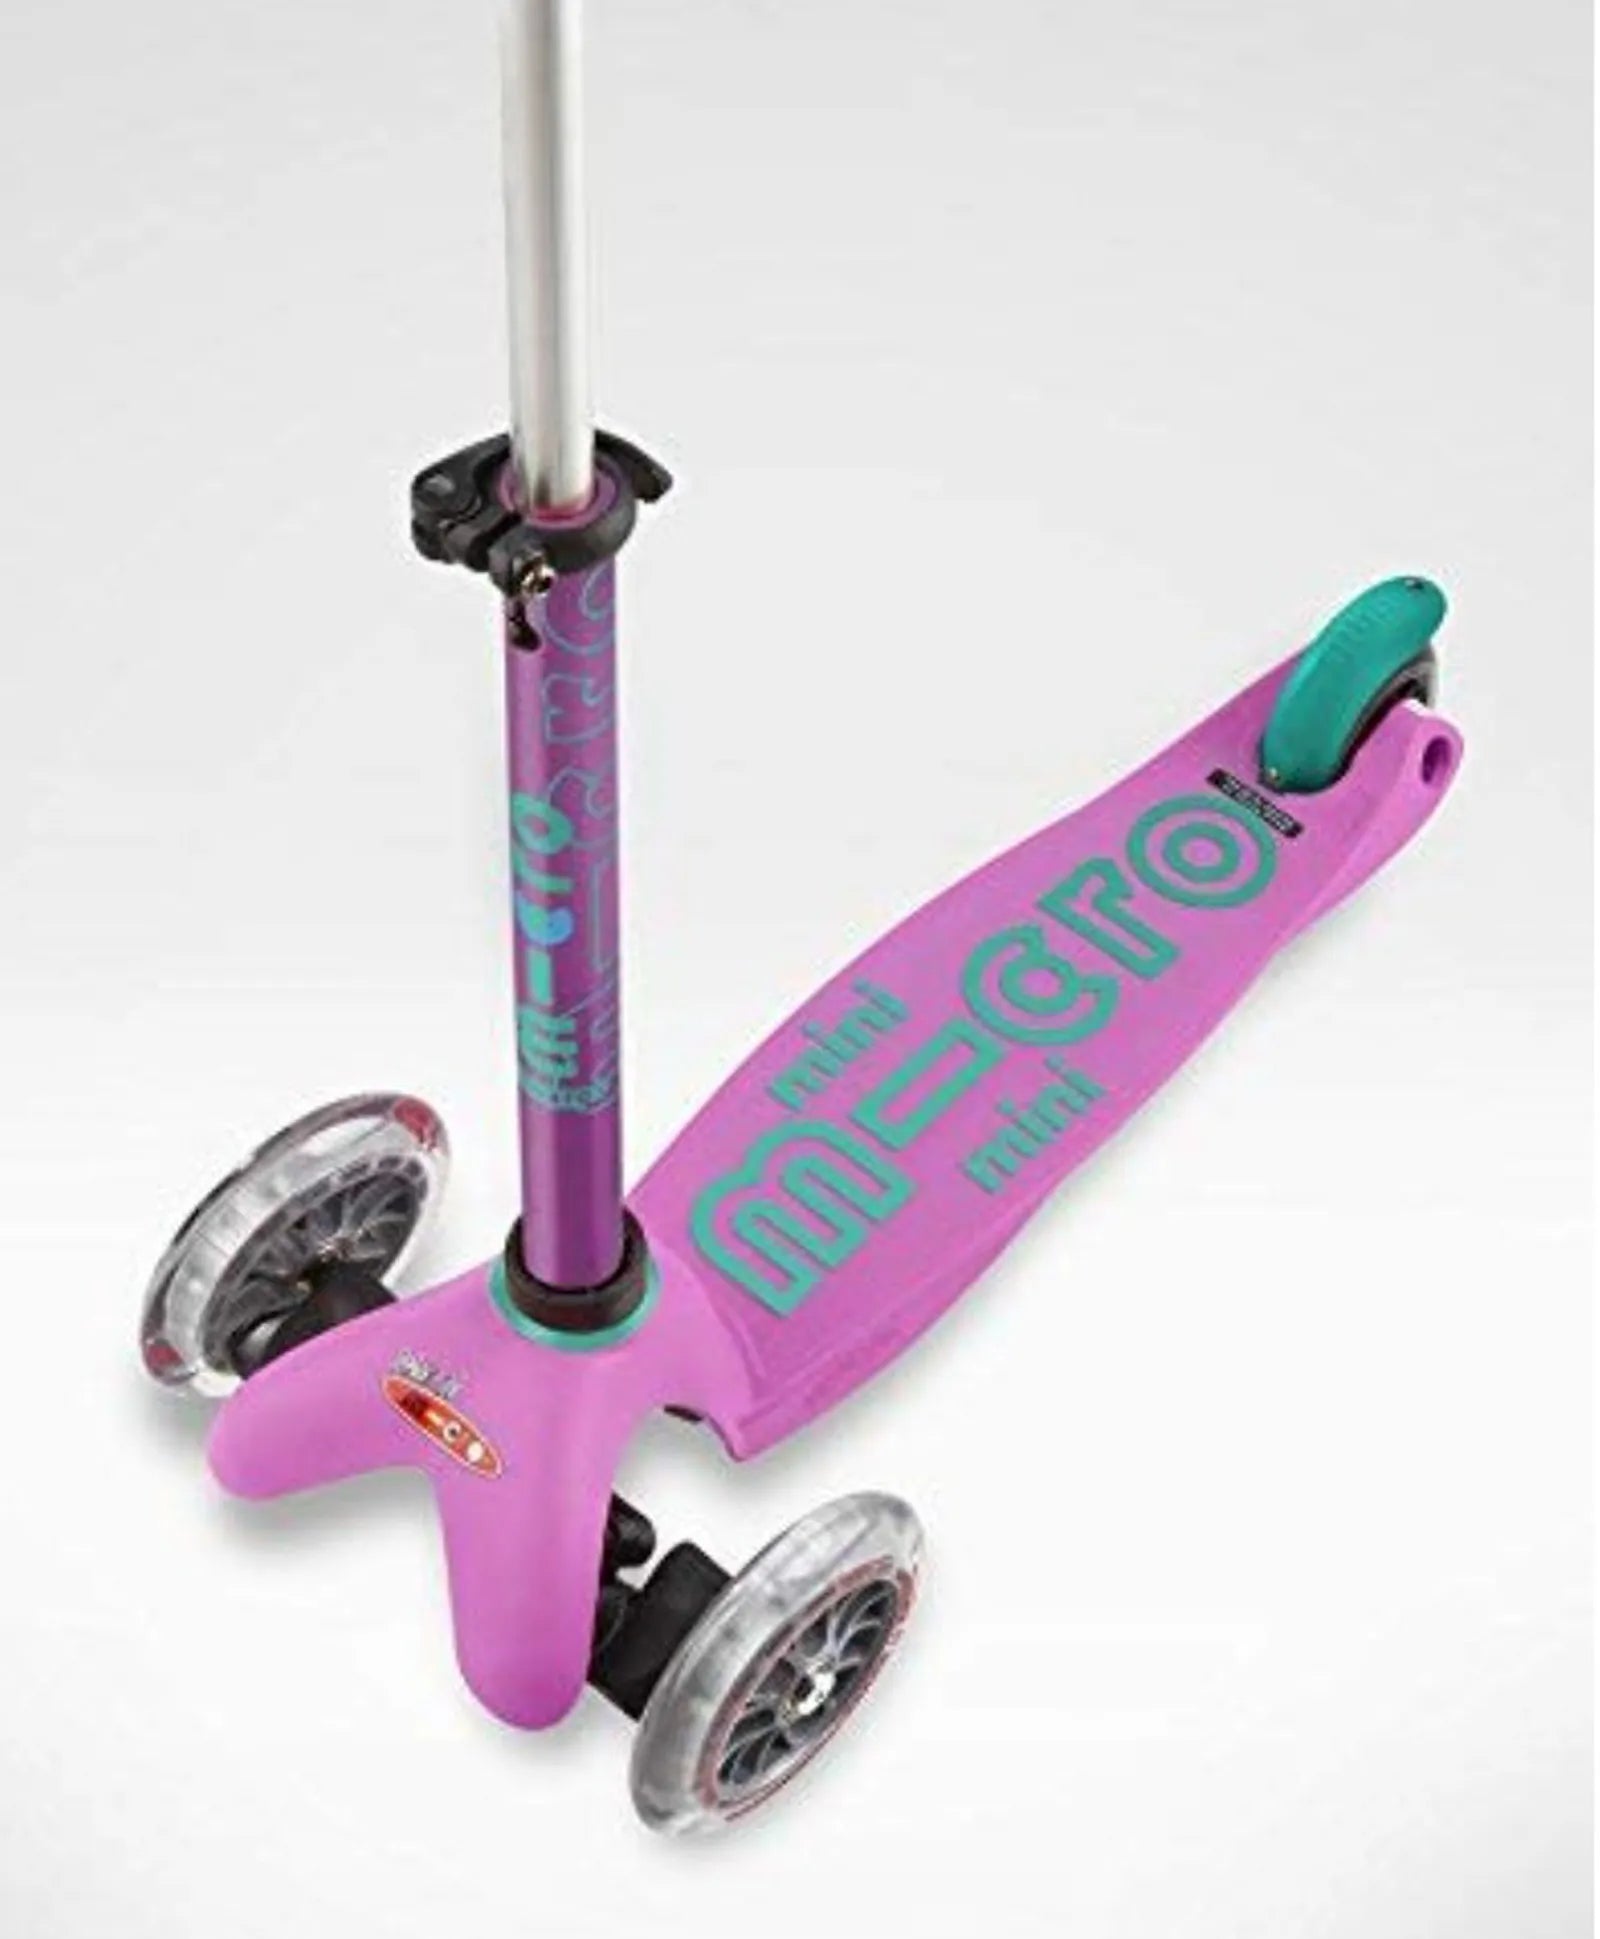 Micro Mini Deluxe Scooter with LED Wheels - Lavender - Laadlee